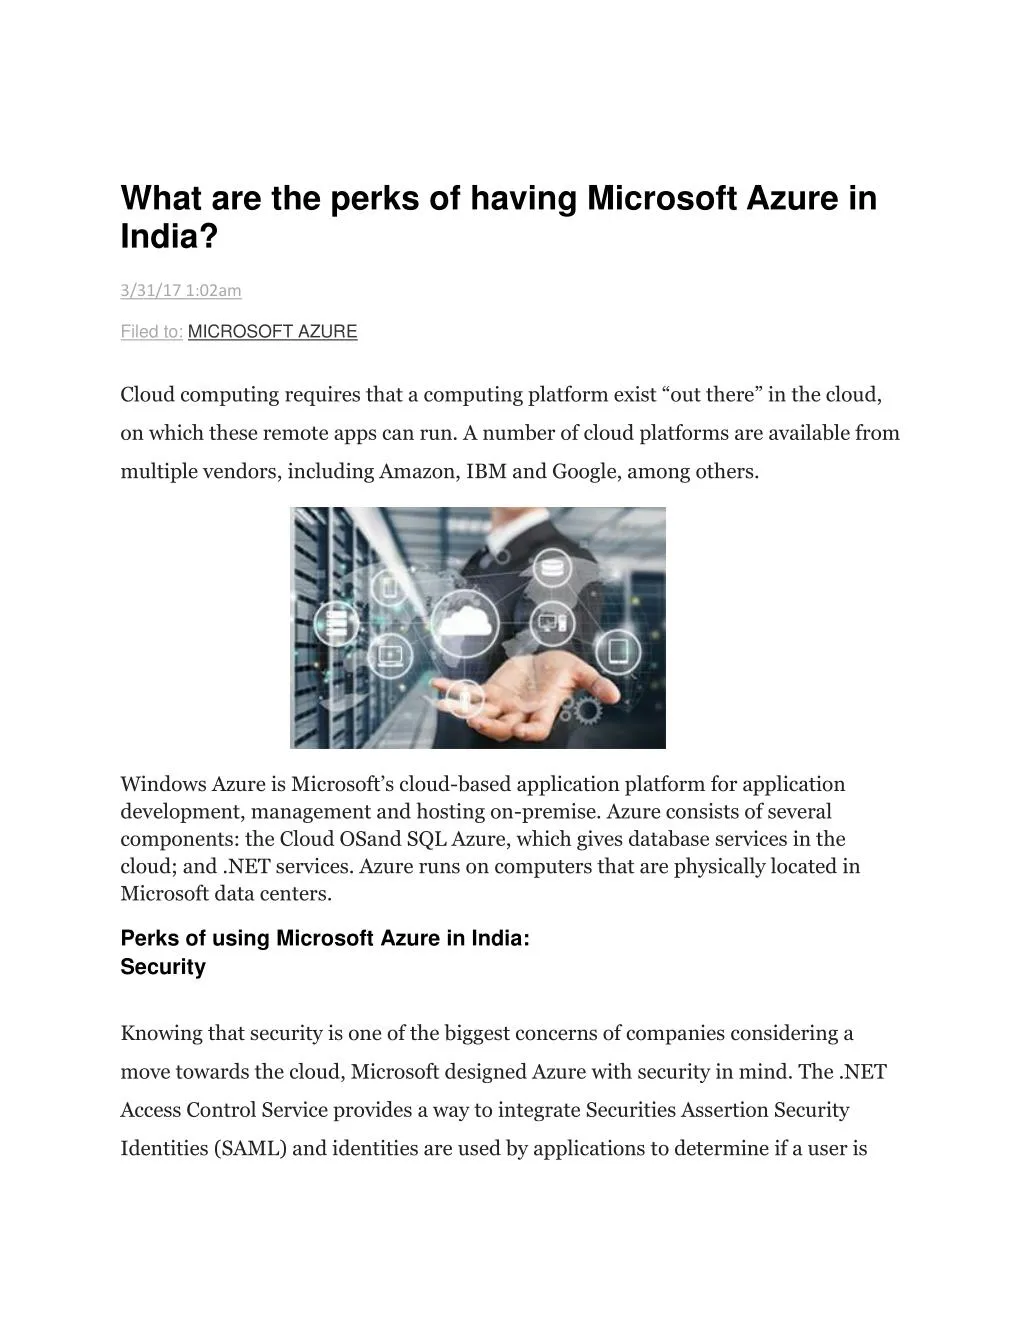 what are the perks of having microsoft azure